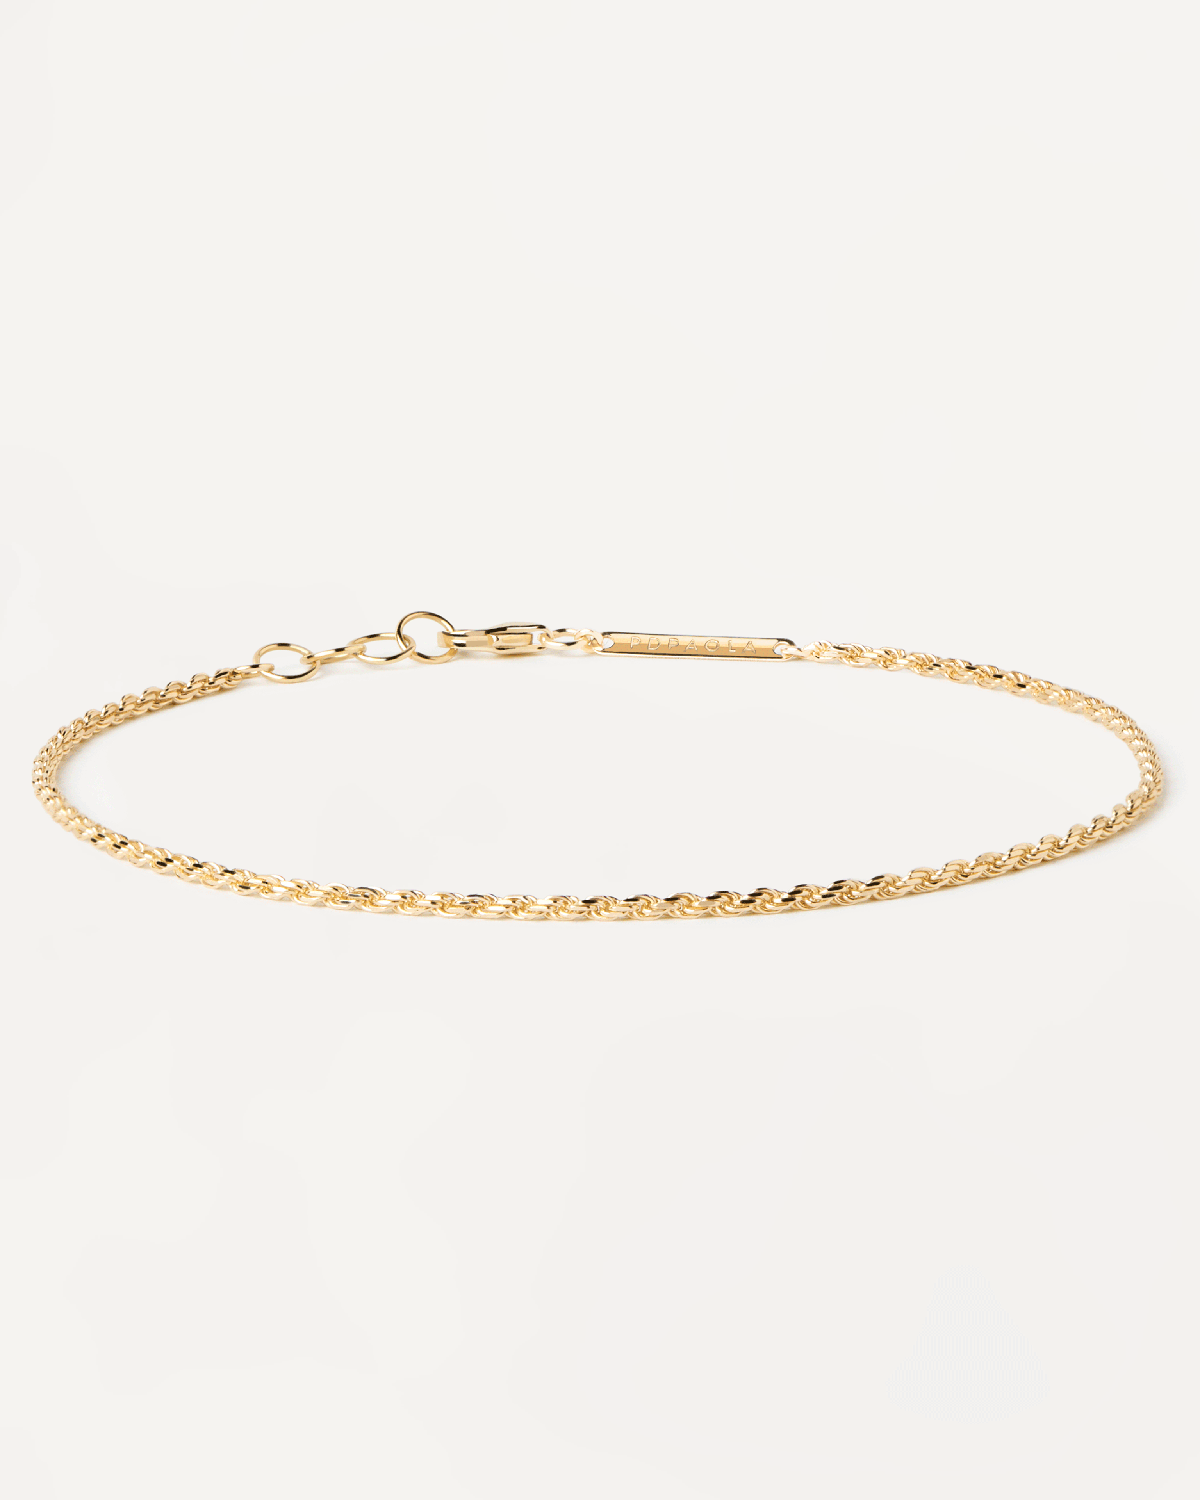 2023 Selection | Gold Rope Chain Bracelet. 18K solid yellow gold chain bracelet with rope links. Get the latest arrival from PDPAOLA. Place your order safely and get this Best Seller. Free Shipping.